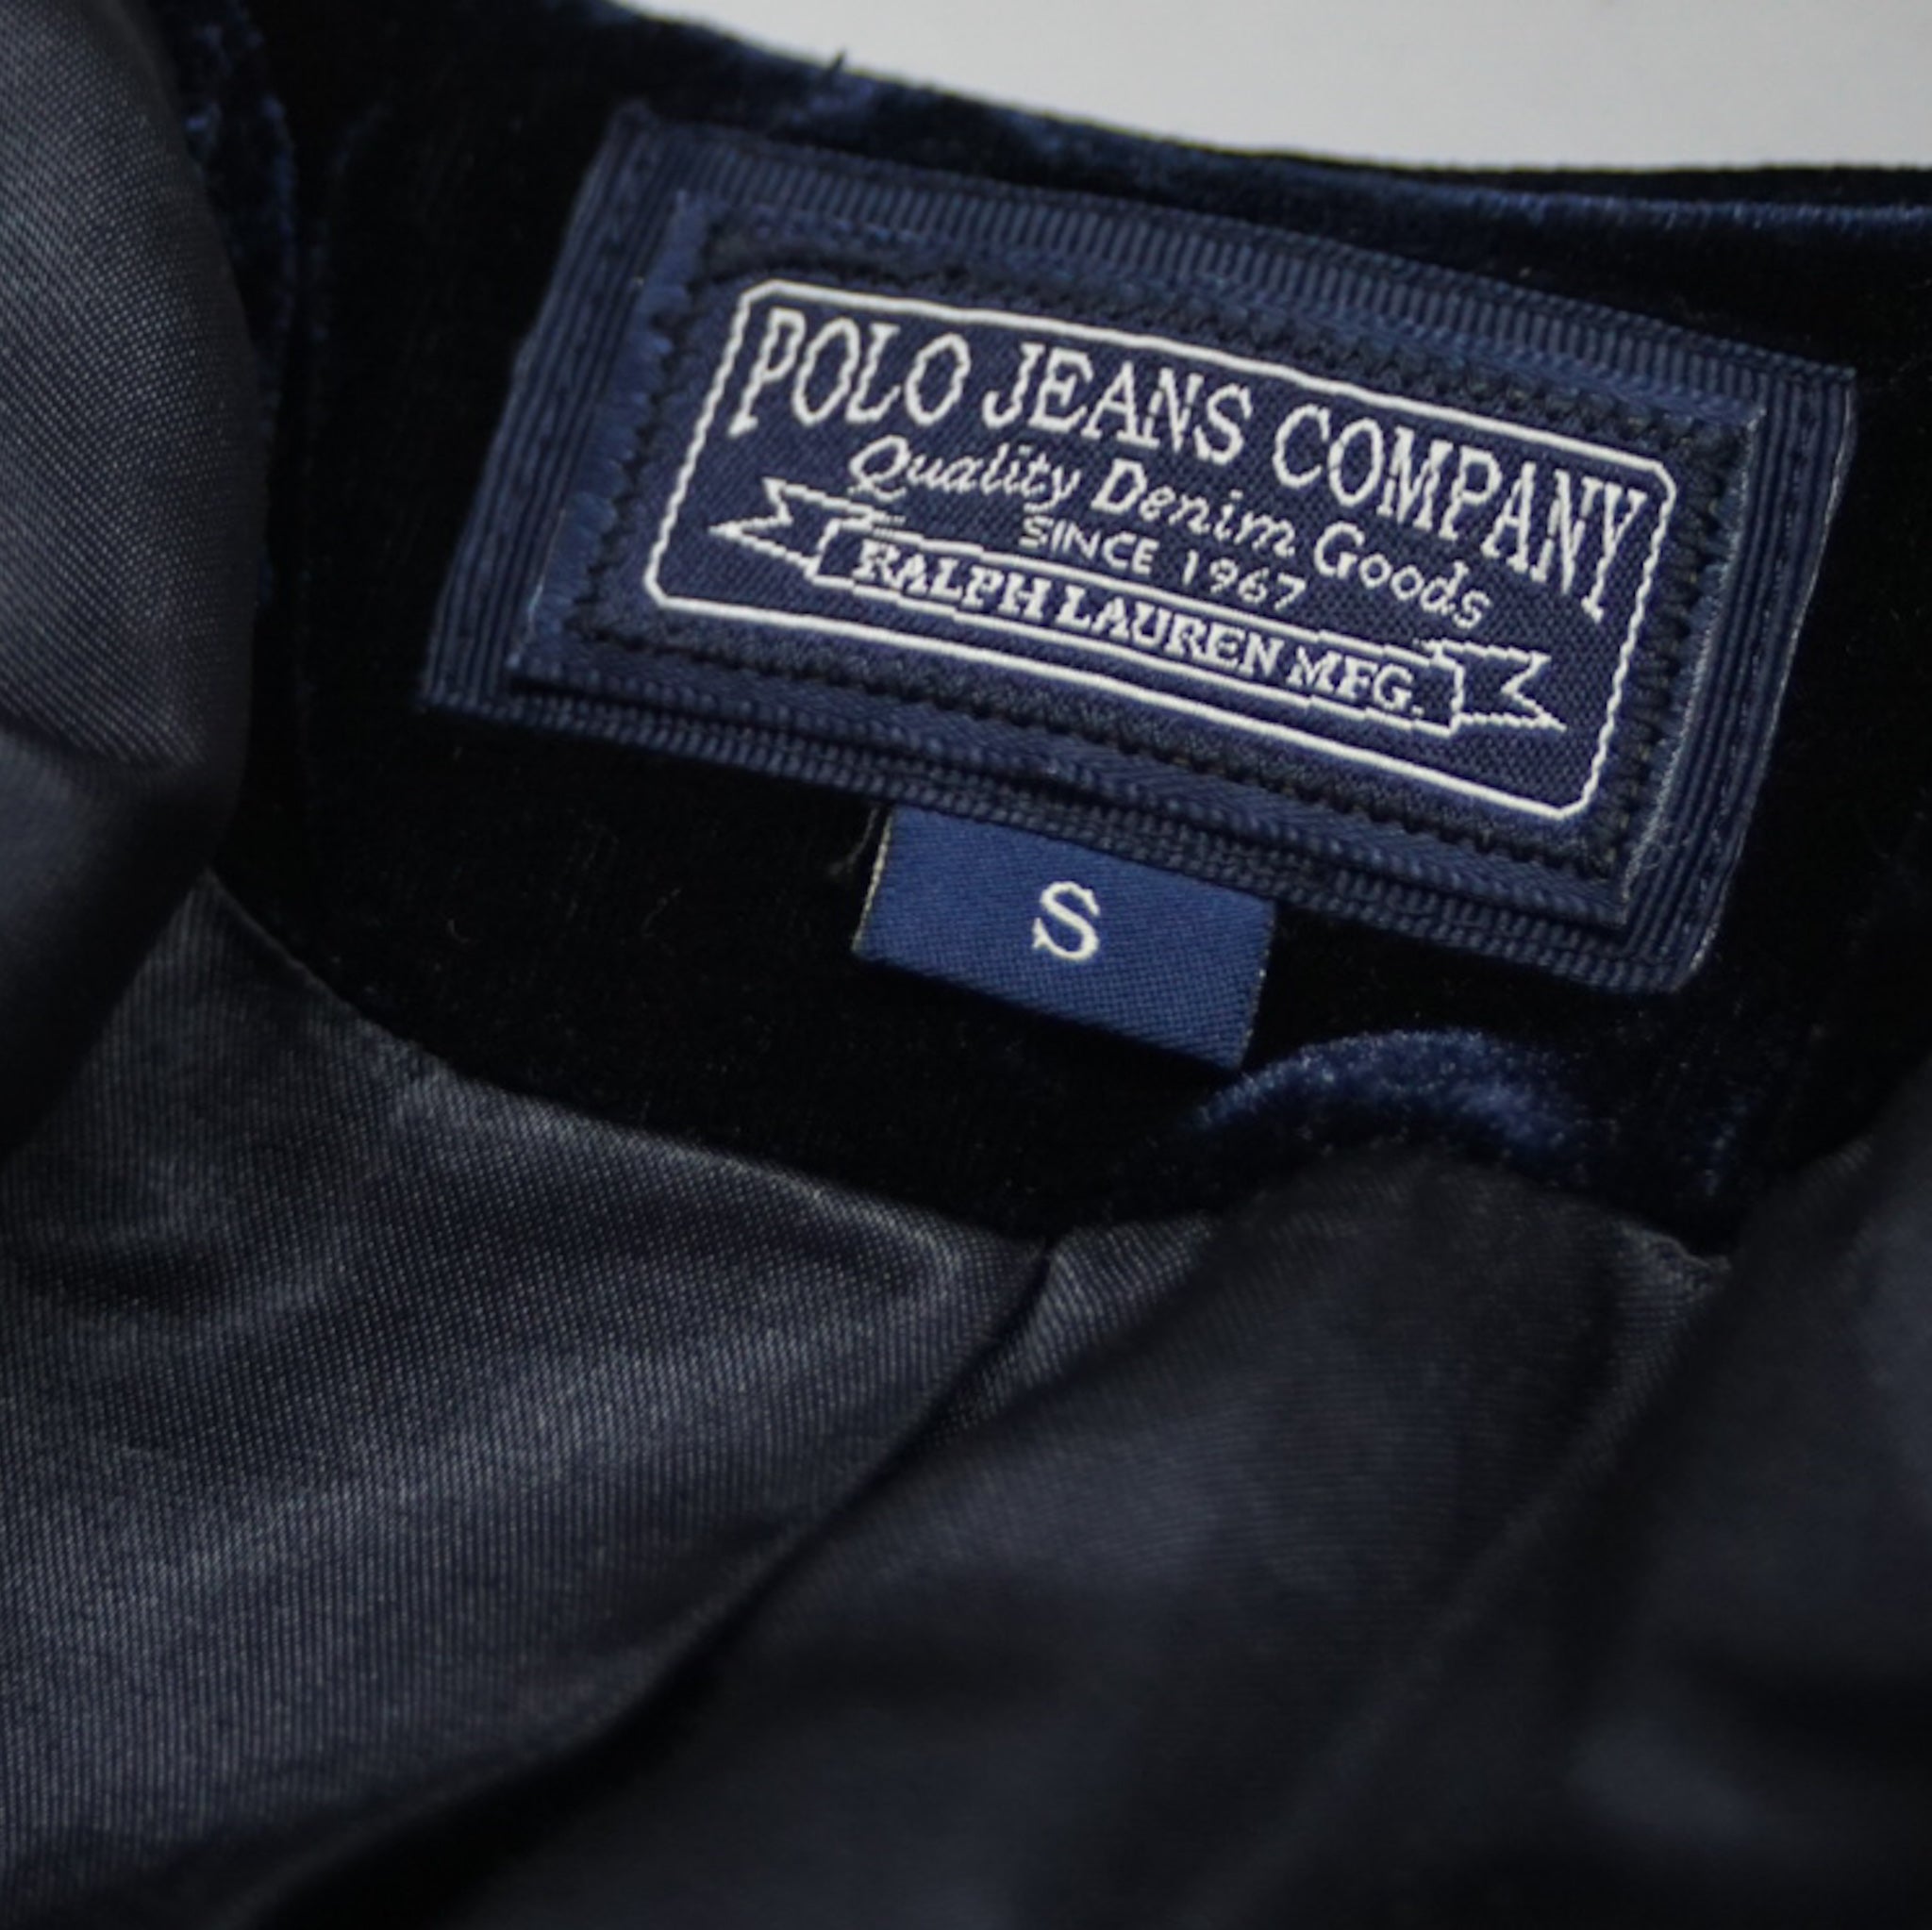 Polo Jeans Company Ralph Lauren in size S